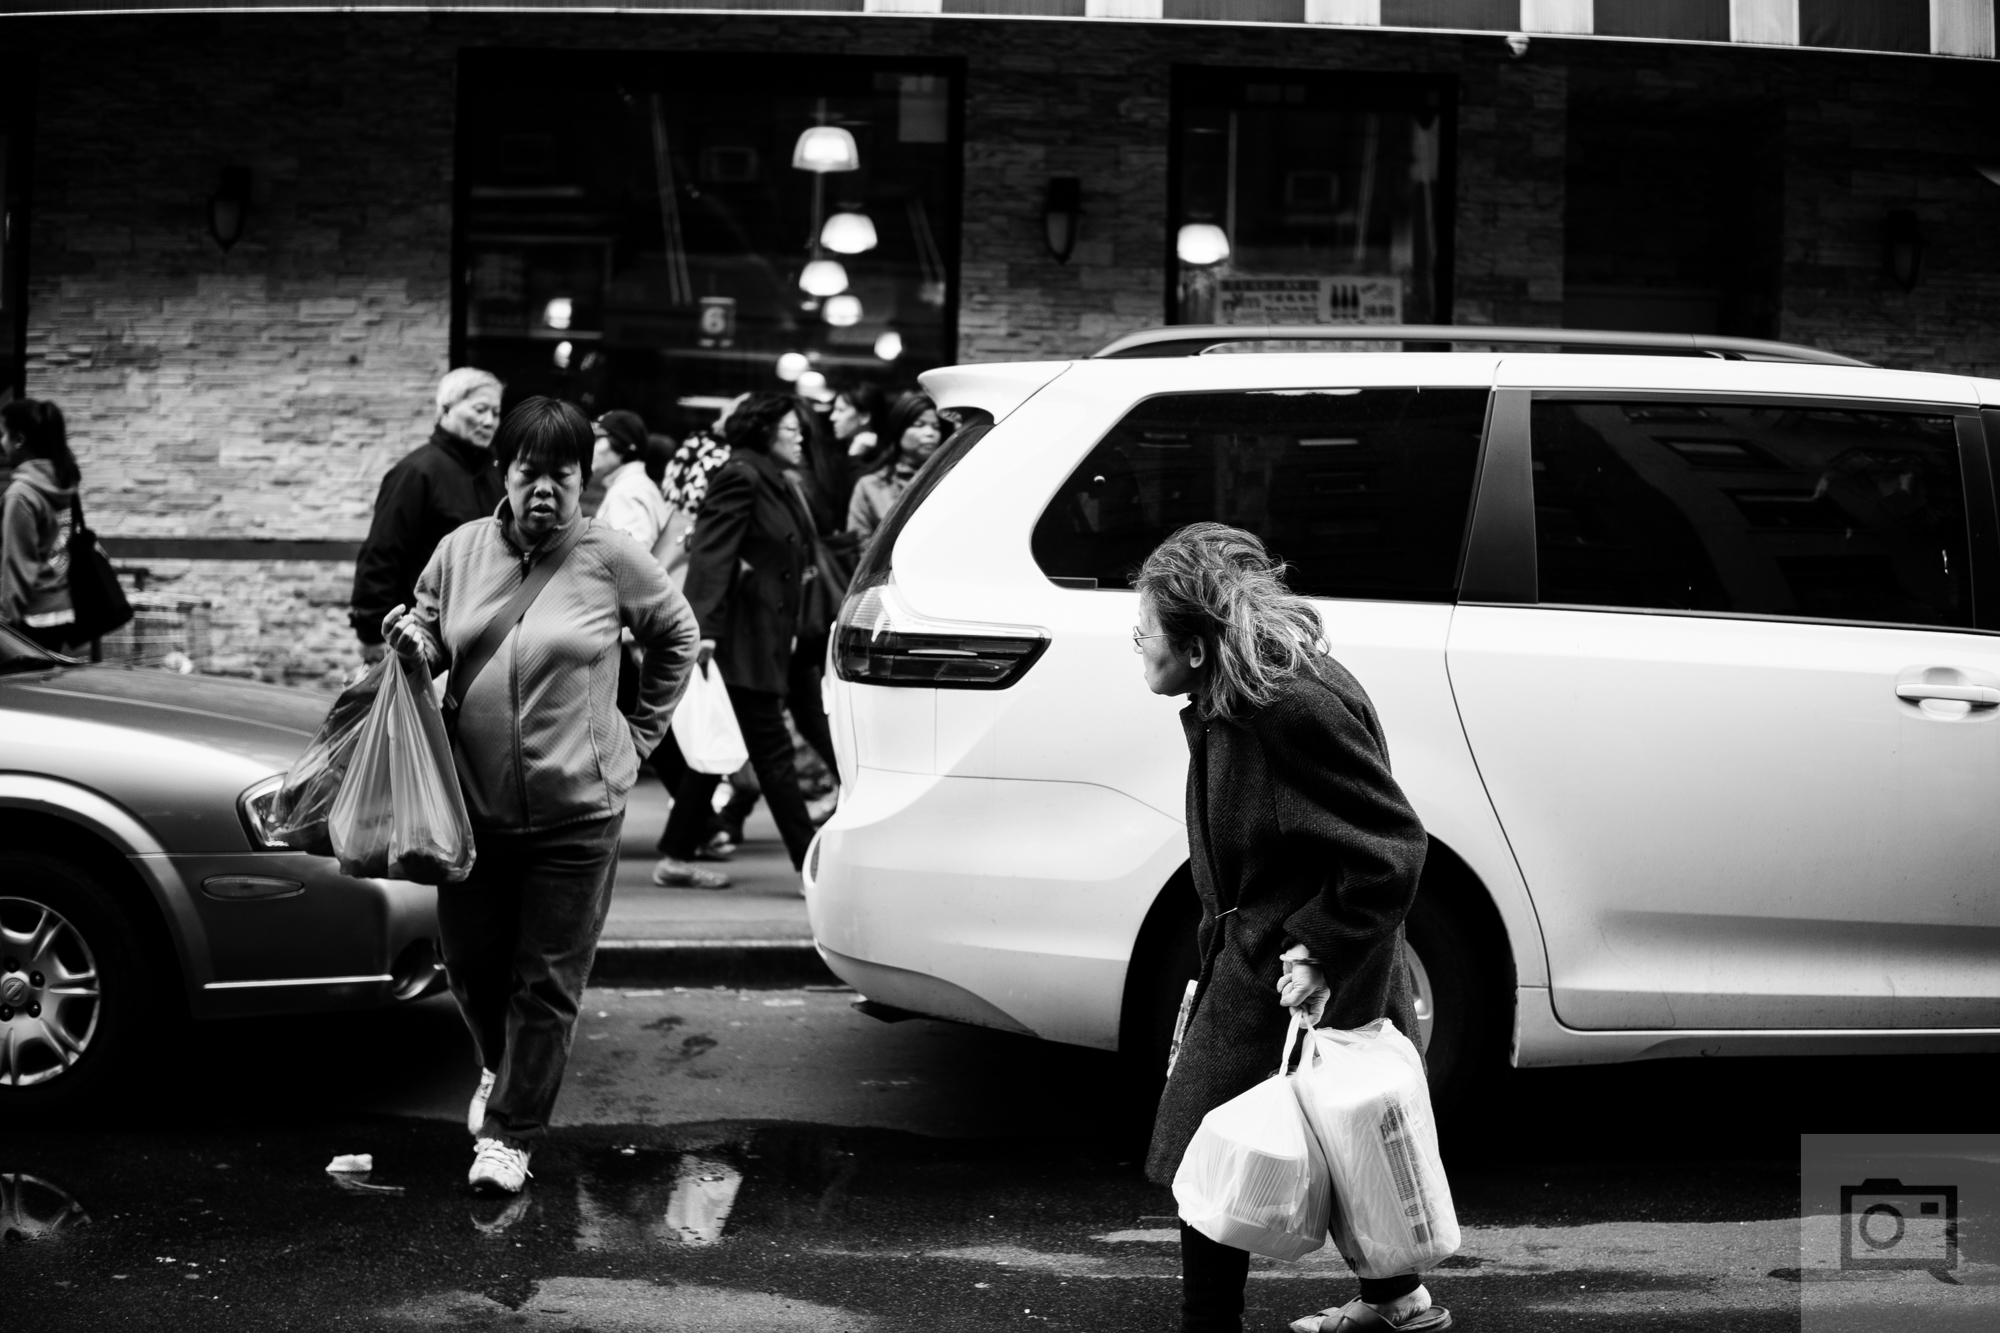 How to Avoid Confrontation When Doing Street Photography